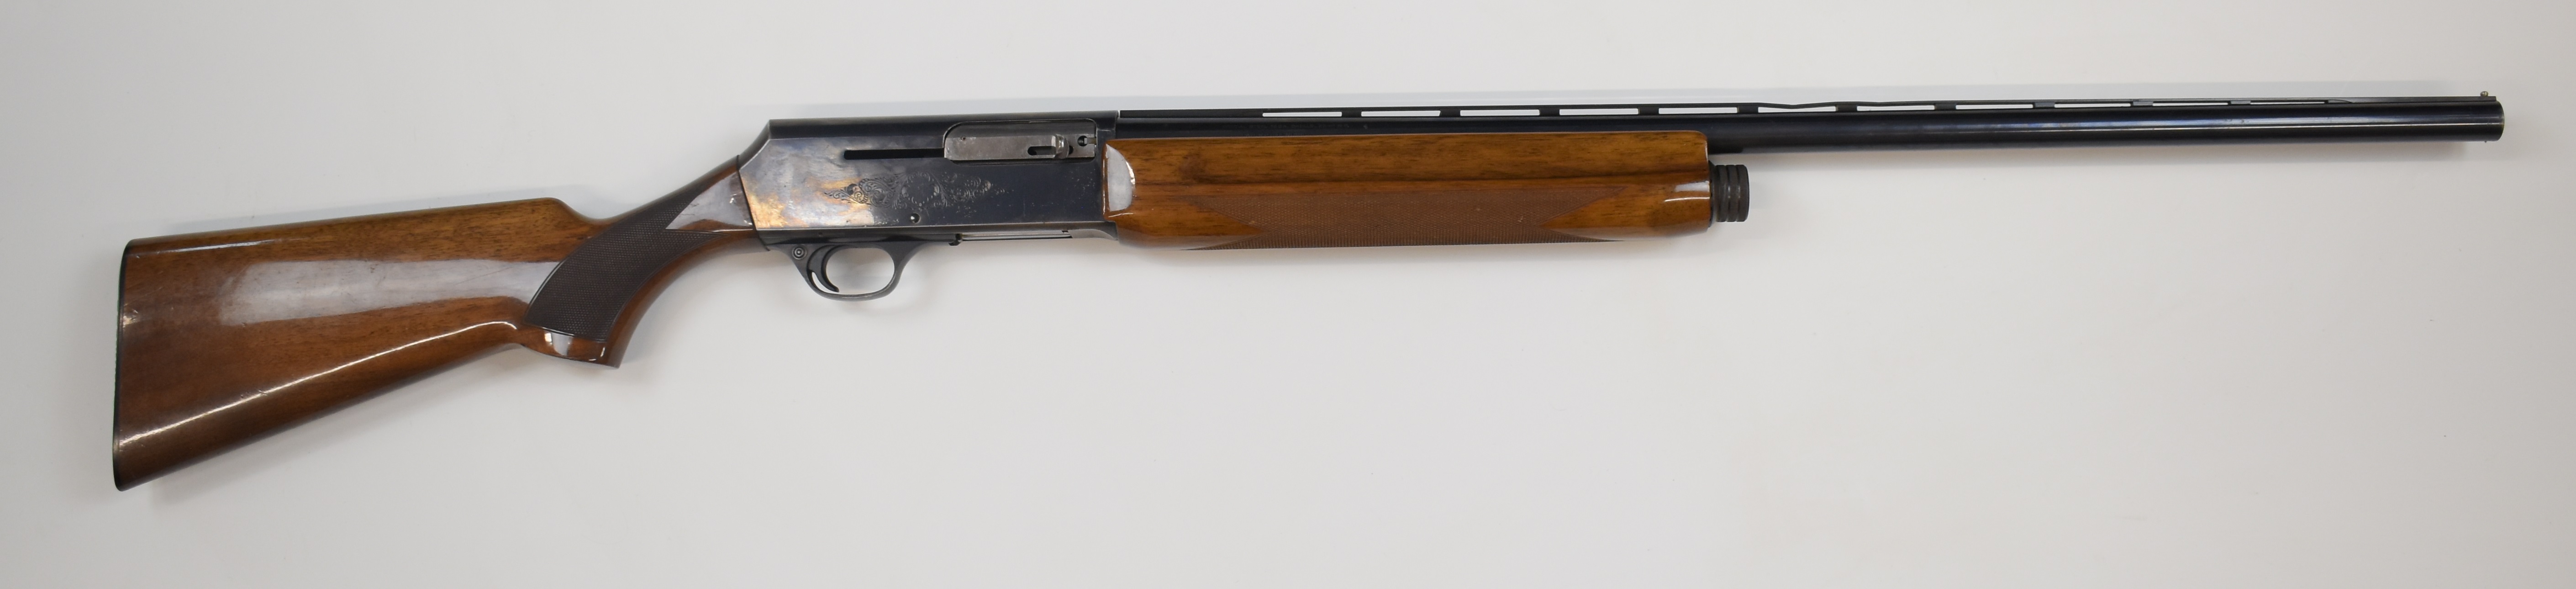 Browning 2000 12 bore 3-shot semi-automatic shotgun with named and engraved lock, chequered semi- - Image 2 of 11